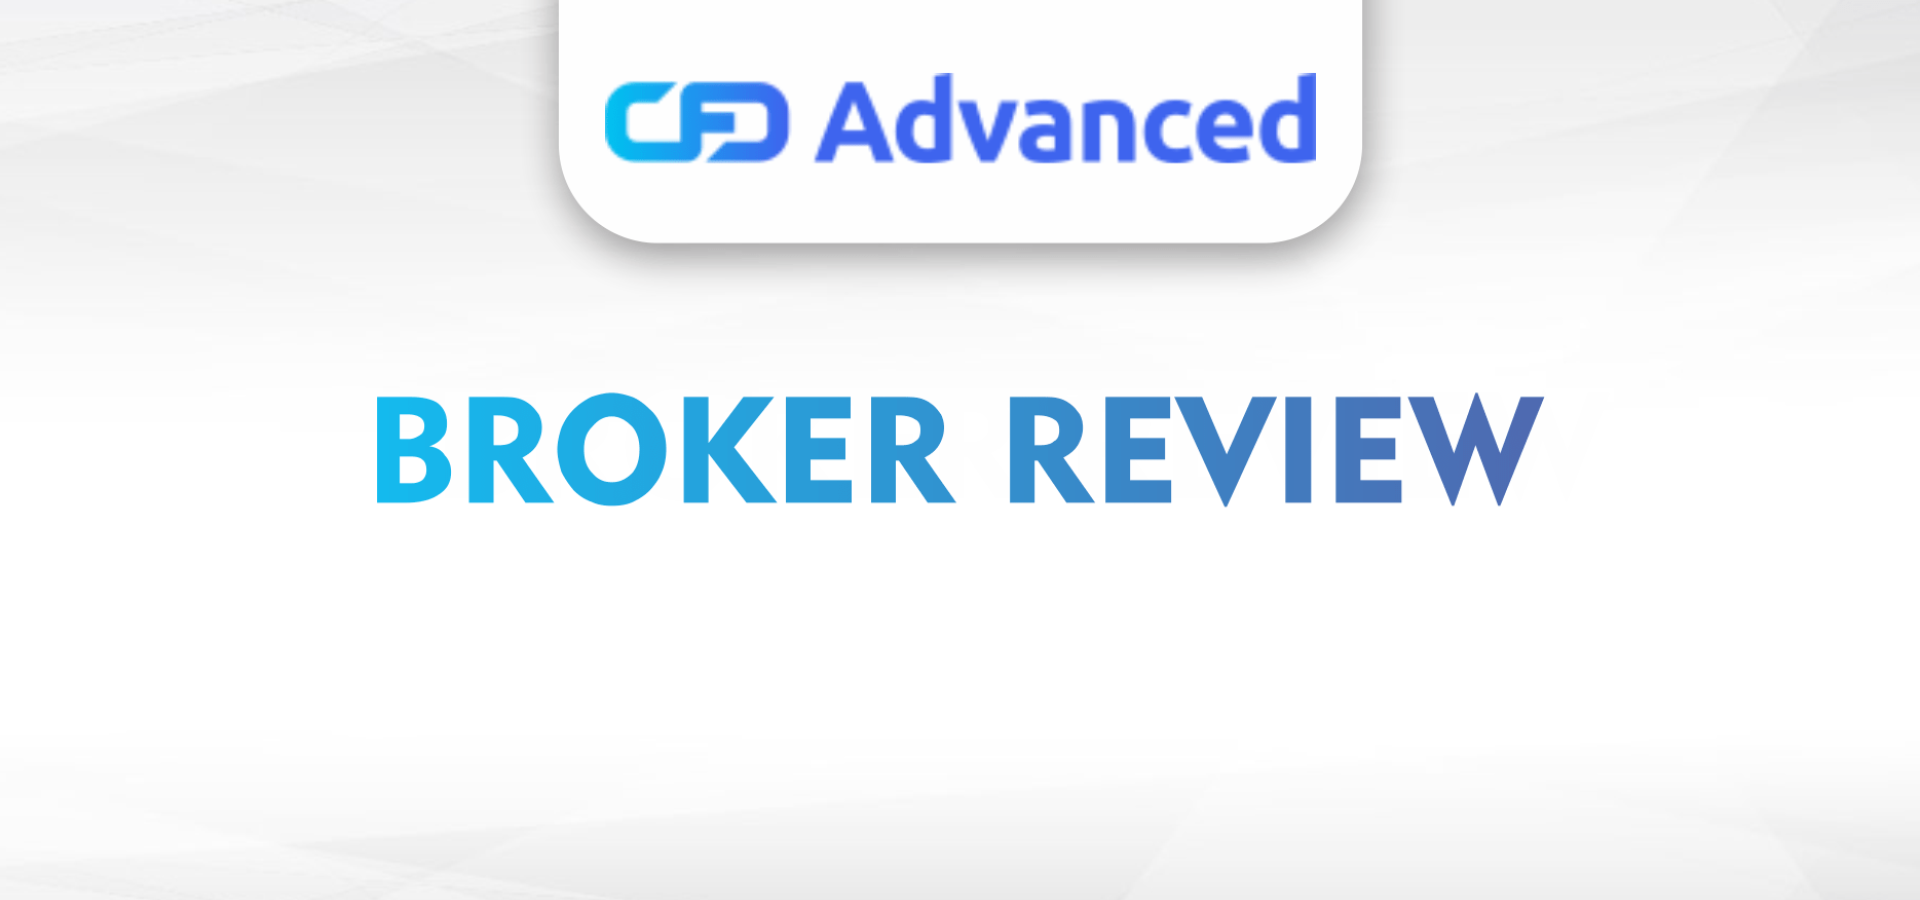 CFDAdvanced Review